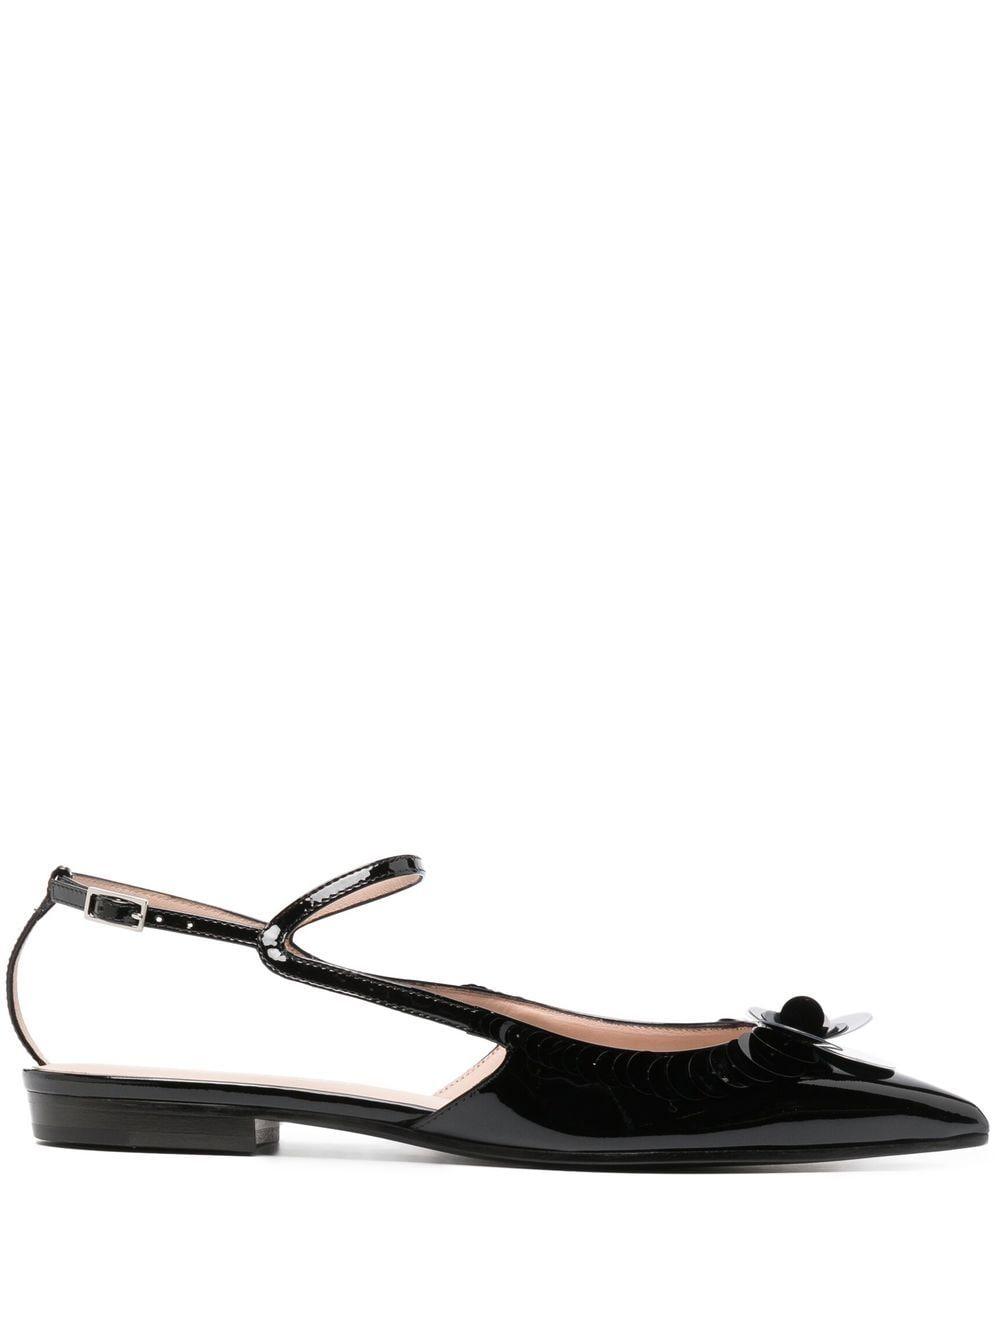 Emporio Armani Sequin-embellished Ballerina Shoes in Black | Lyst